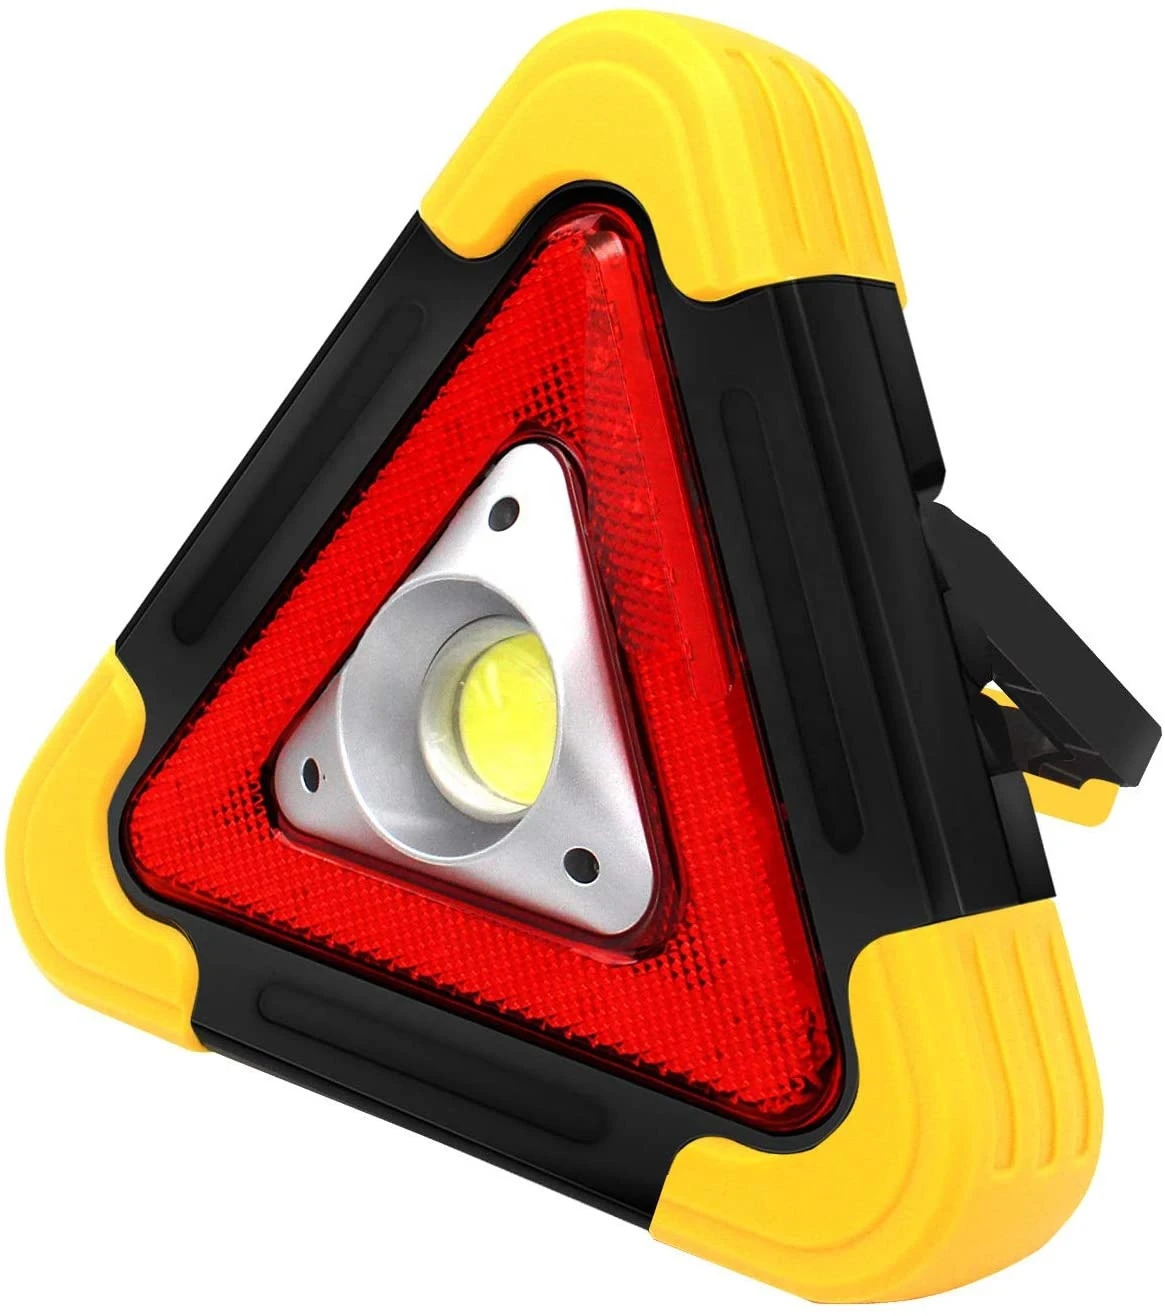 Portable LED Work Light Triangle Car Warning Light for Car Repairing Emergency Hurricanes 3 AA Batteries Included